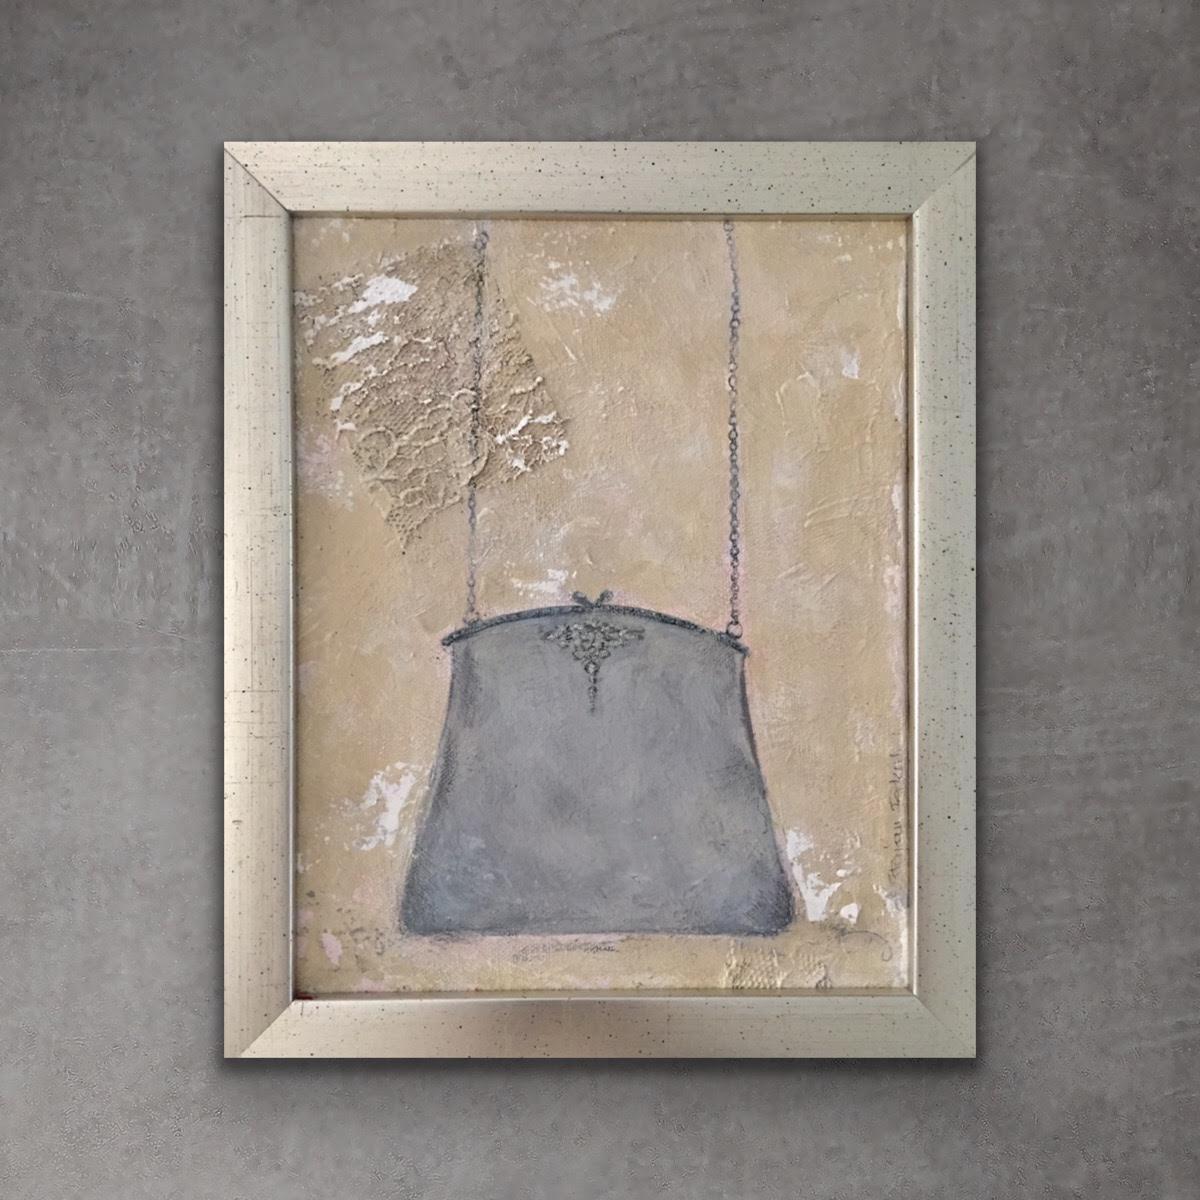 Evening Bag - 11.4" x 9.4", Painting On Canvas, Framed, Blush, Grey, Neutral